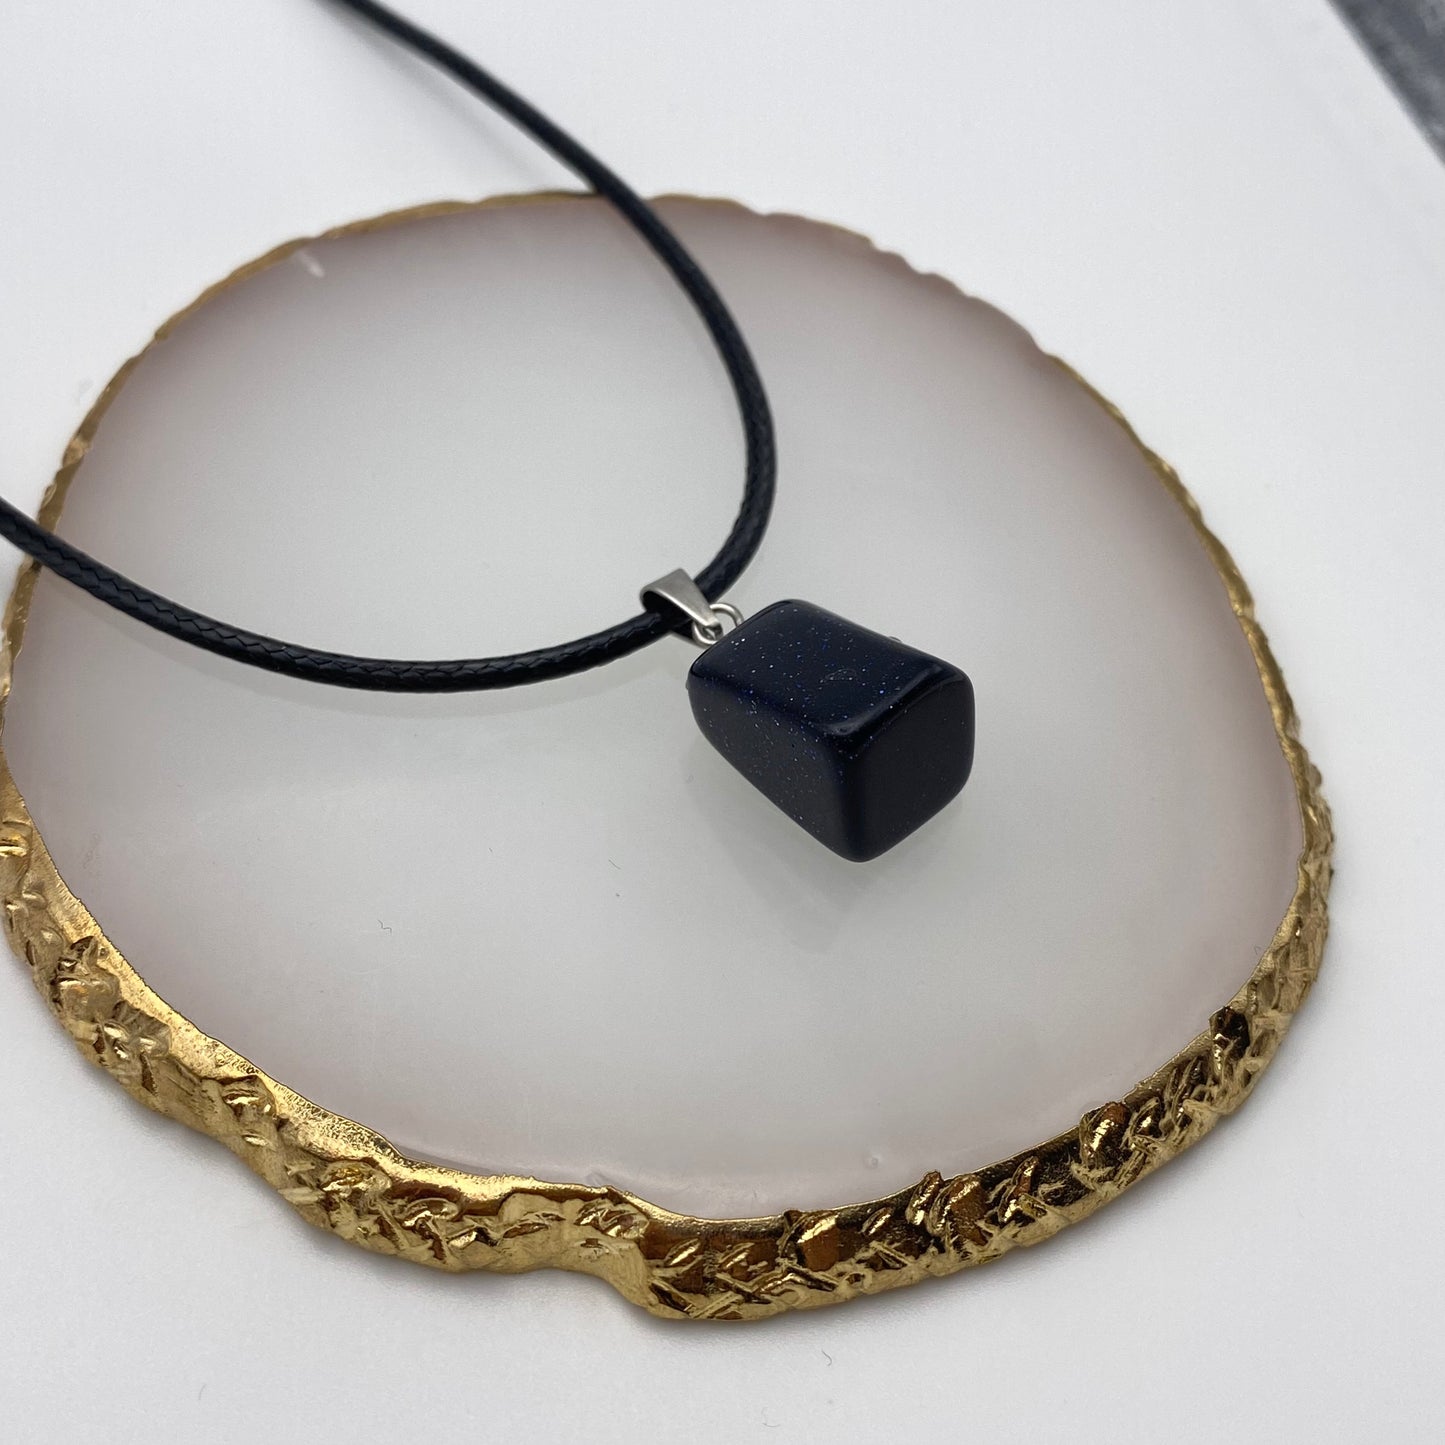 Sparkly Black Crystal Chunk Necklace on Black Cord